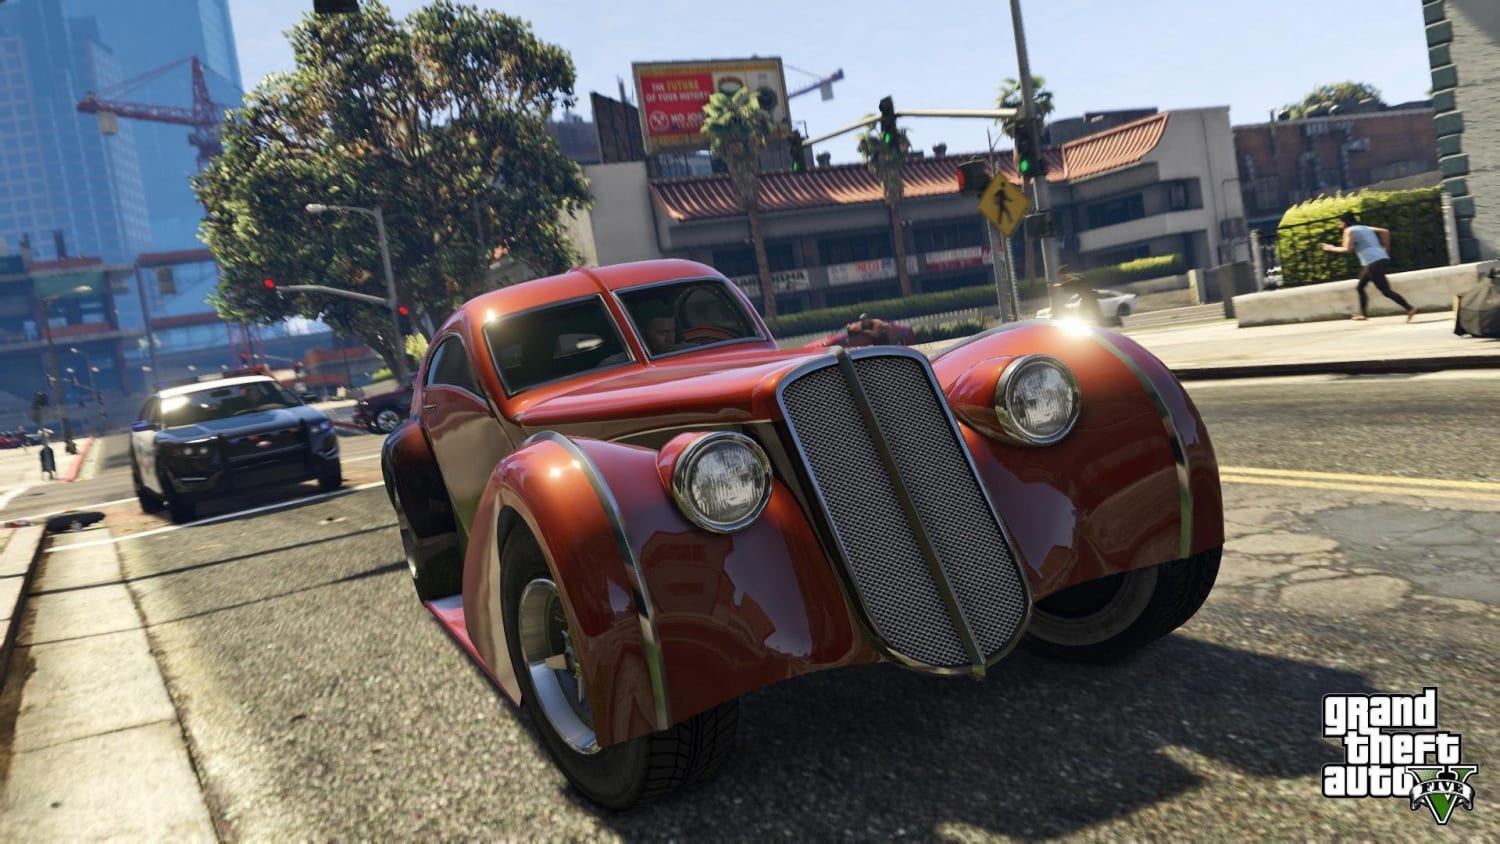 5 reasons why you need GTA 5 on PS4 or Xbox One